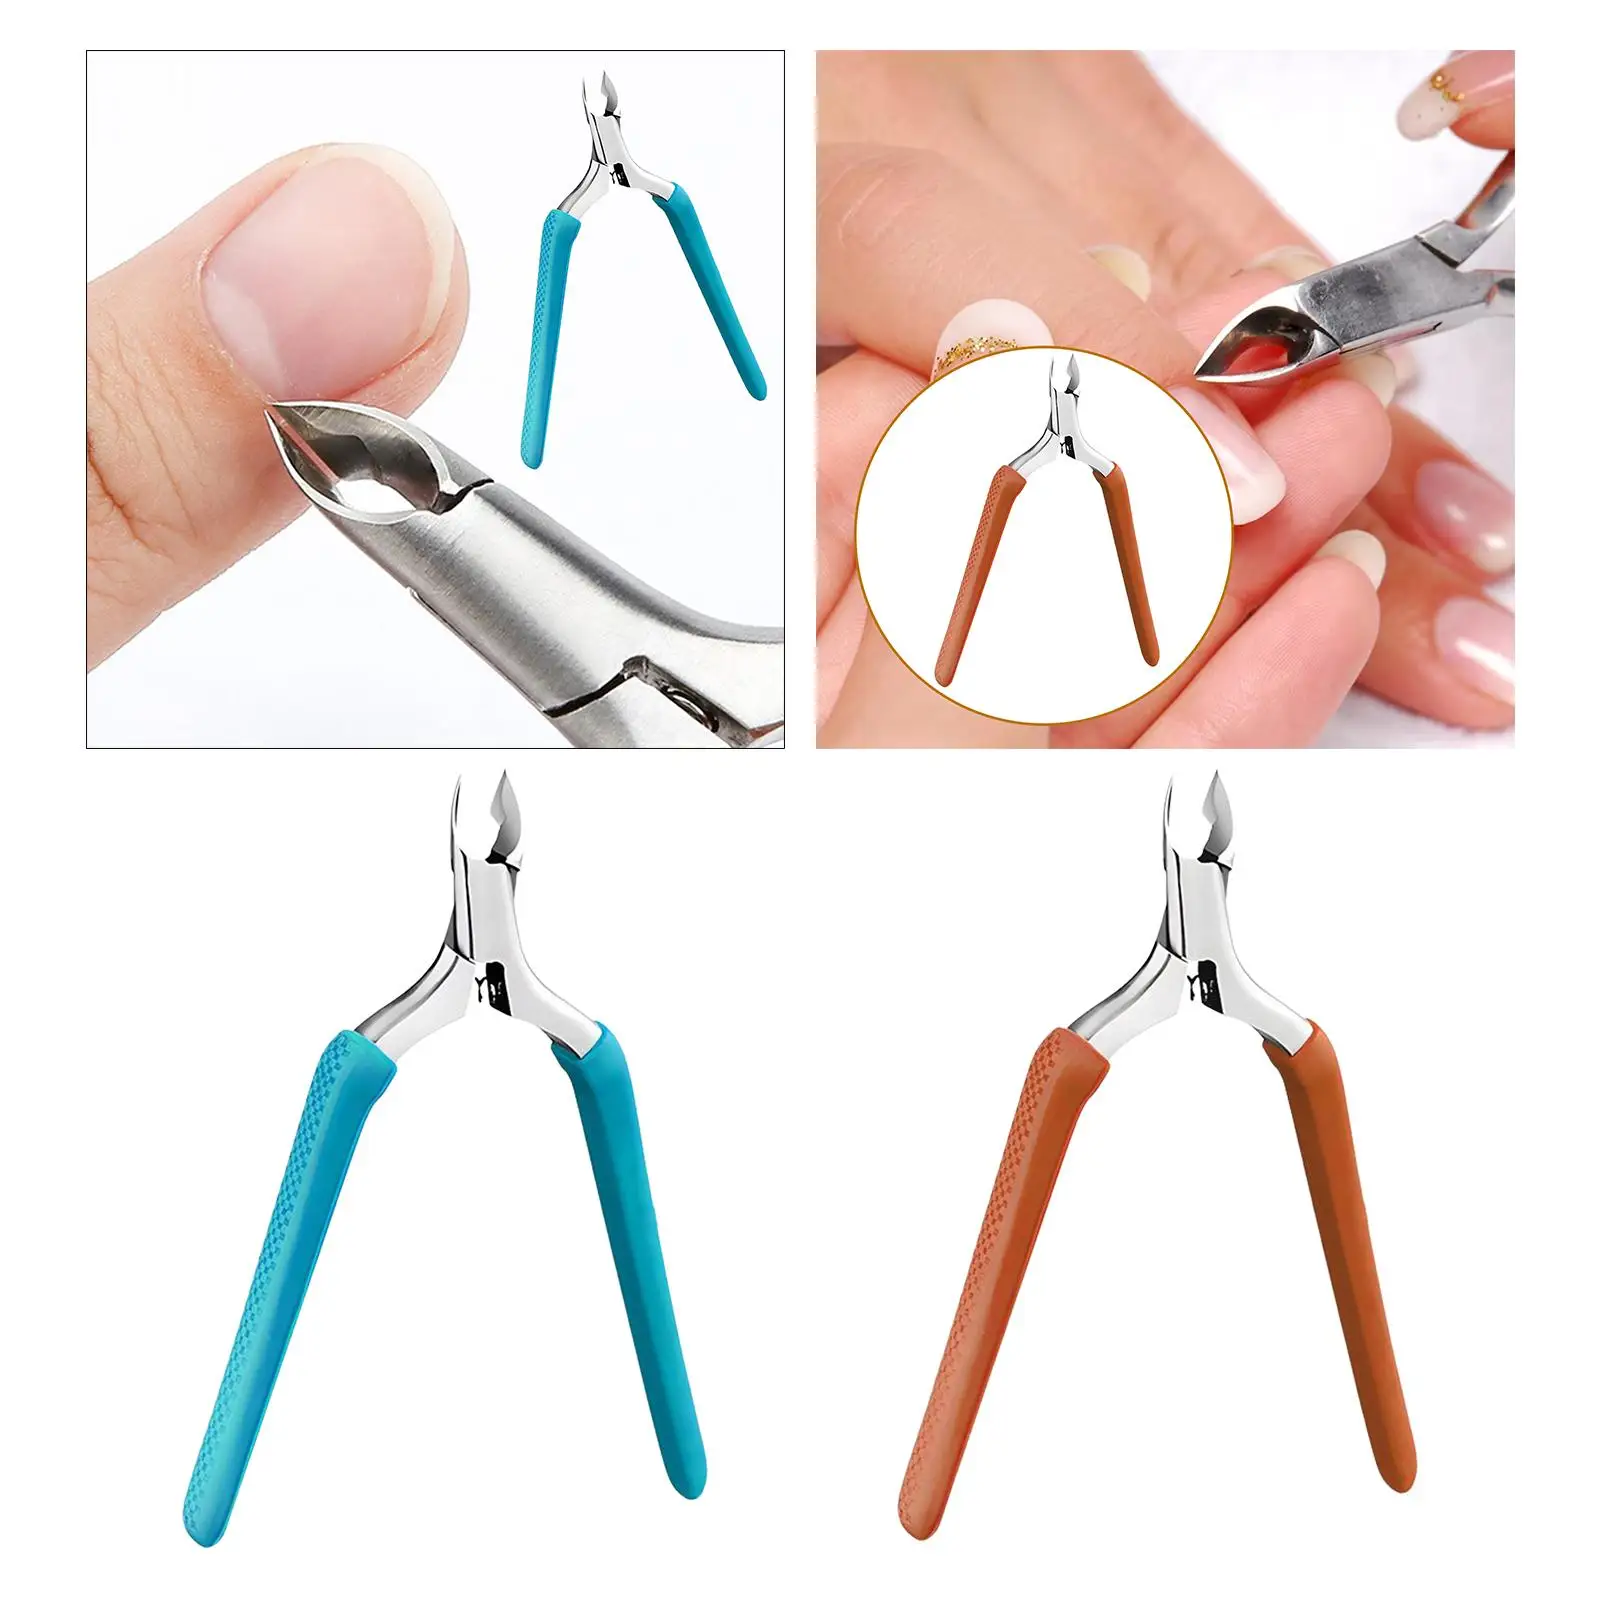 Cuticle Trimmer Nail Dry Skin Remover Strong Cuticle Care Nail Scissors Cuticle Nipper Cuticle Clipper for Manicure and Pedicure